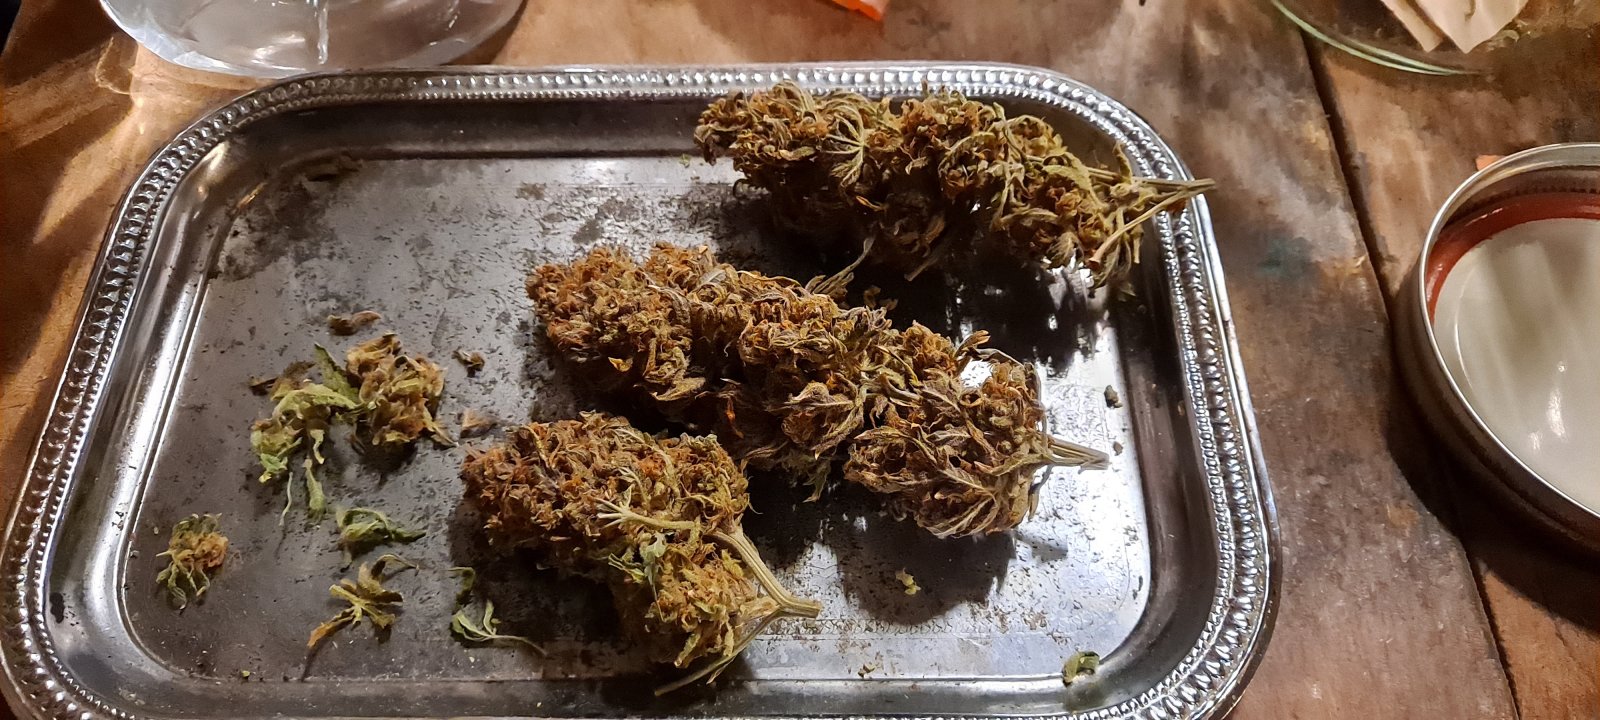 420 tray 6 month cured Green Crack.jpg